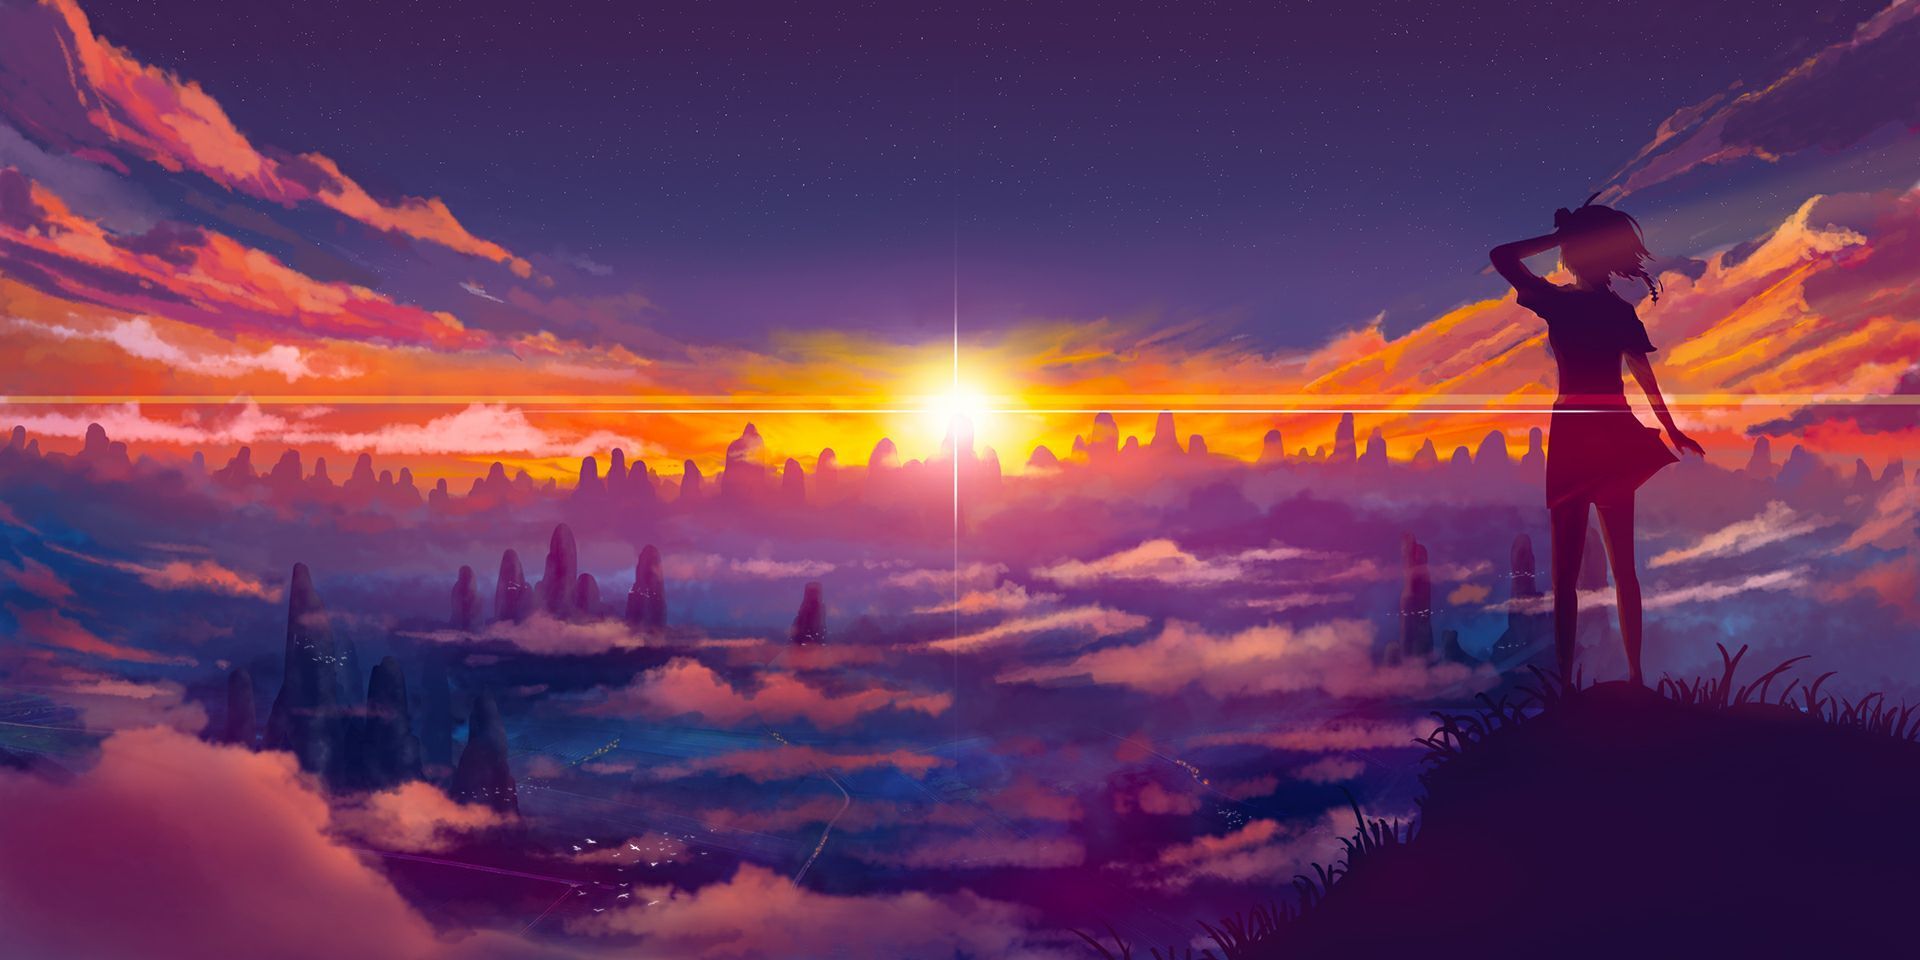 Legends Of The Past. Keith x Reader. Anime scenery, Anime scenery wallpaper, Scenery